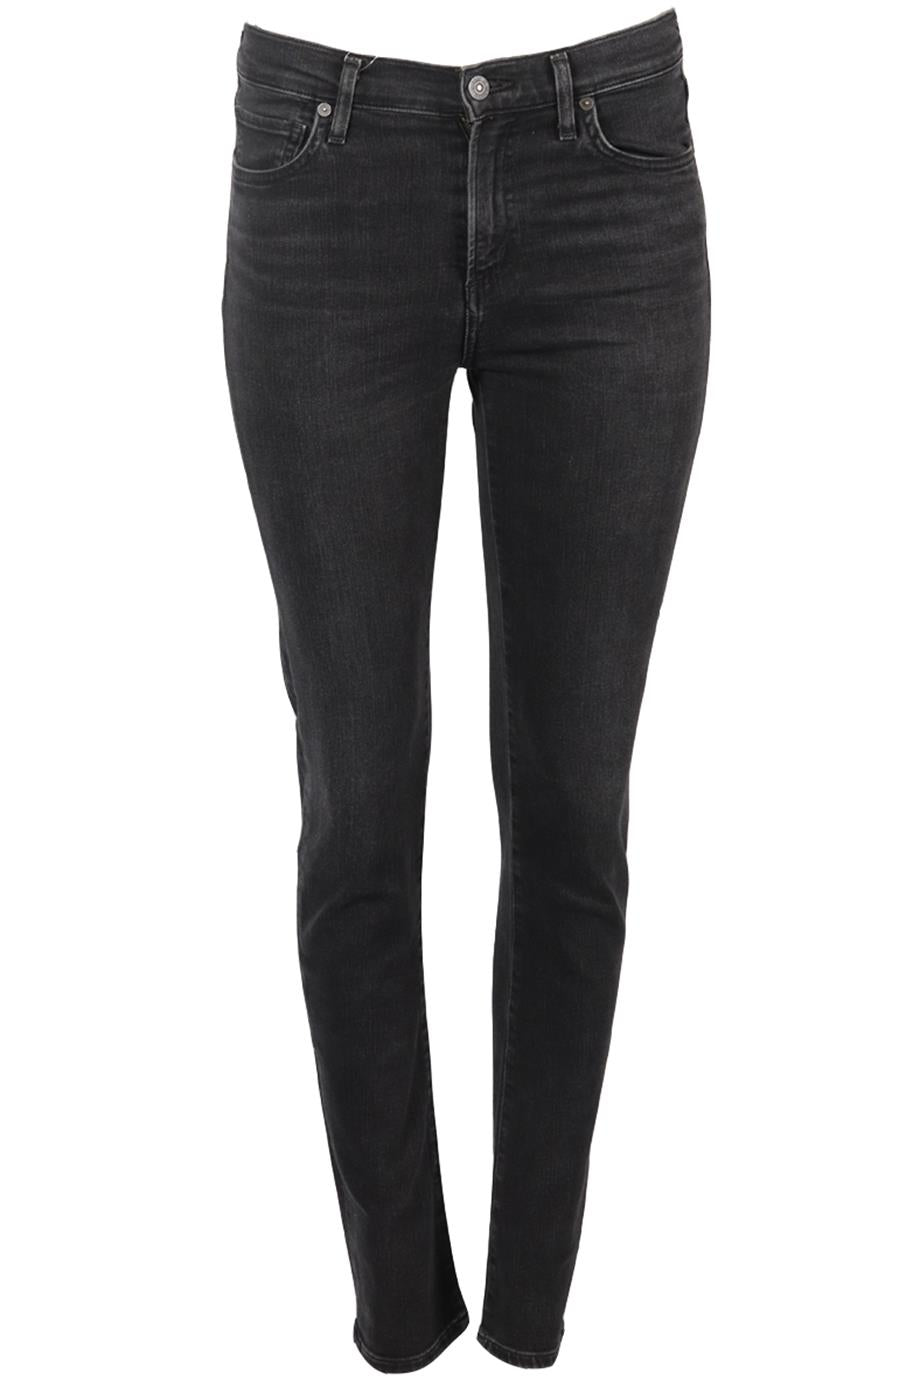 CITIZENS OF HUMANITY HIGH RISE STRAIGHT LEG JEANS W26 UK 8